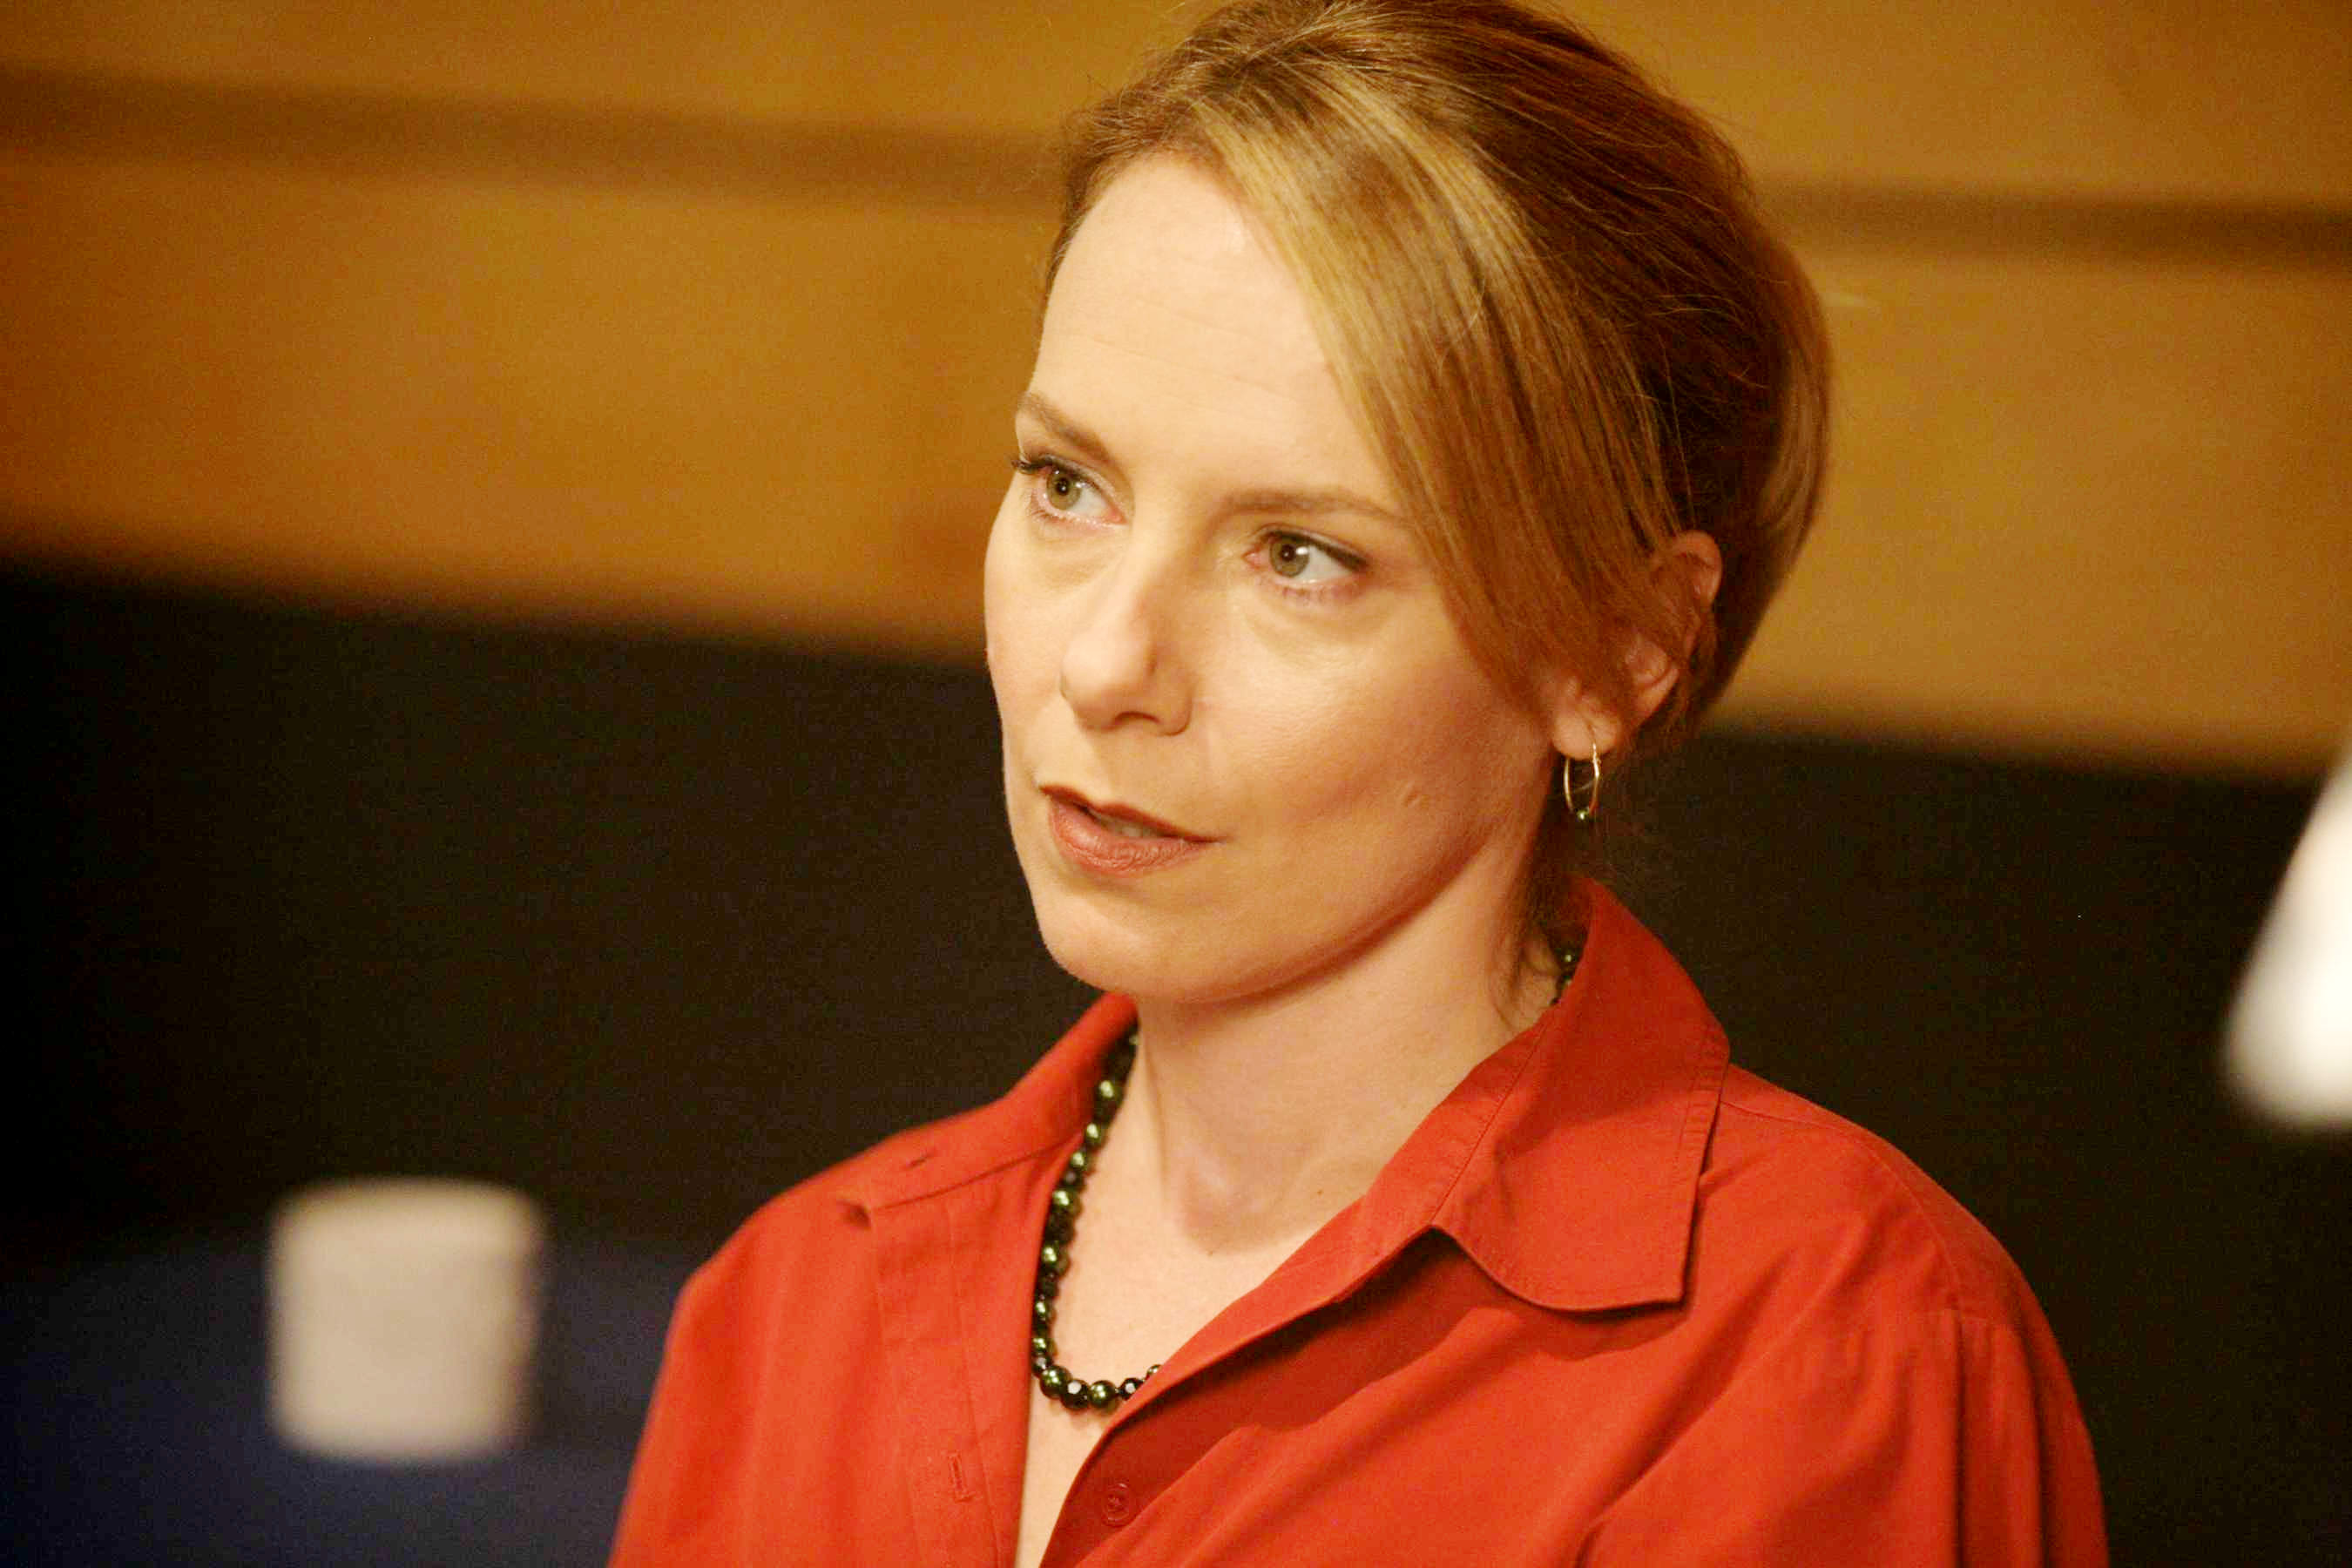 Amy Ryan stars as Miss Charley in Strand Releasing's The Missing Person (2009)